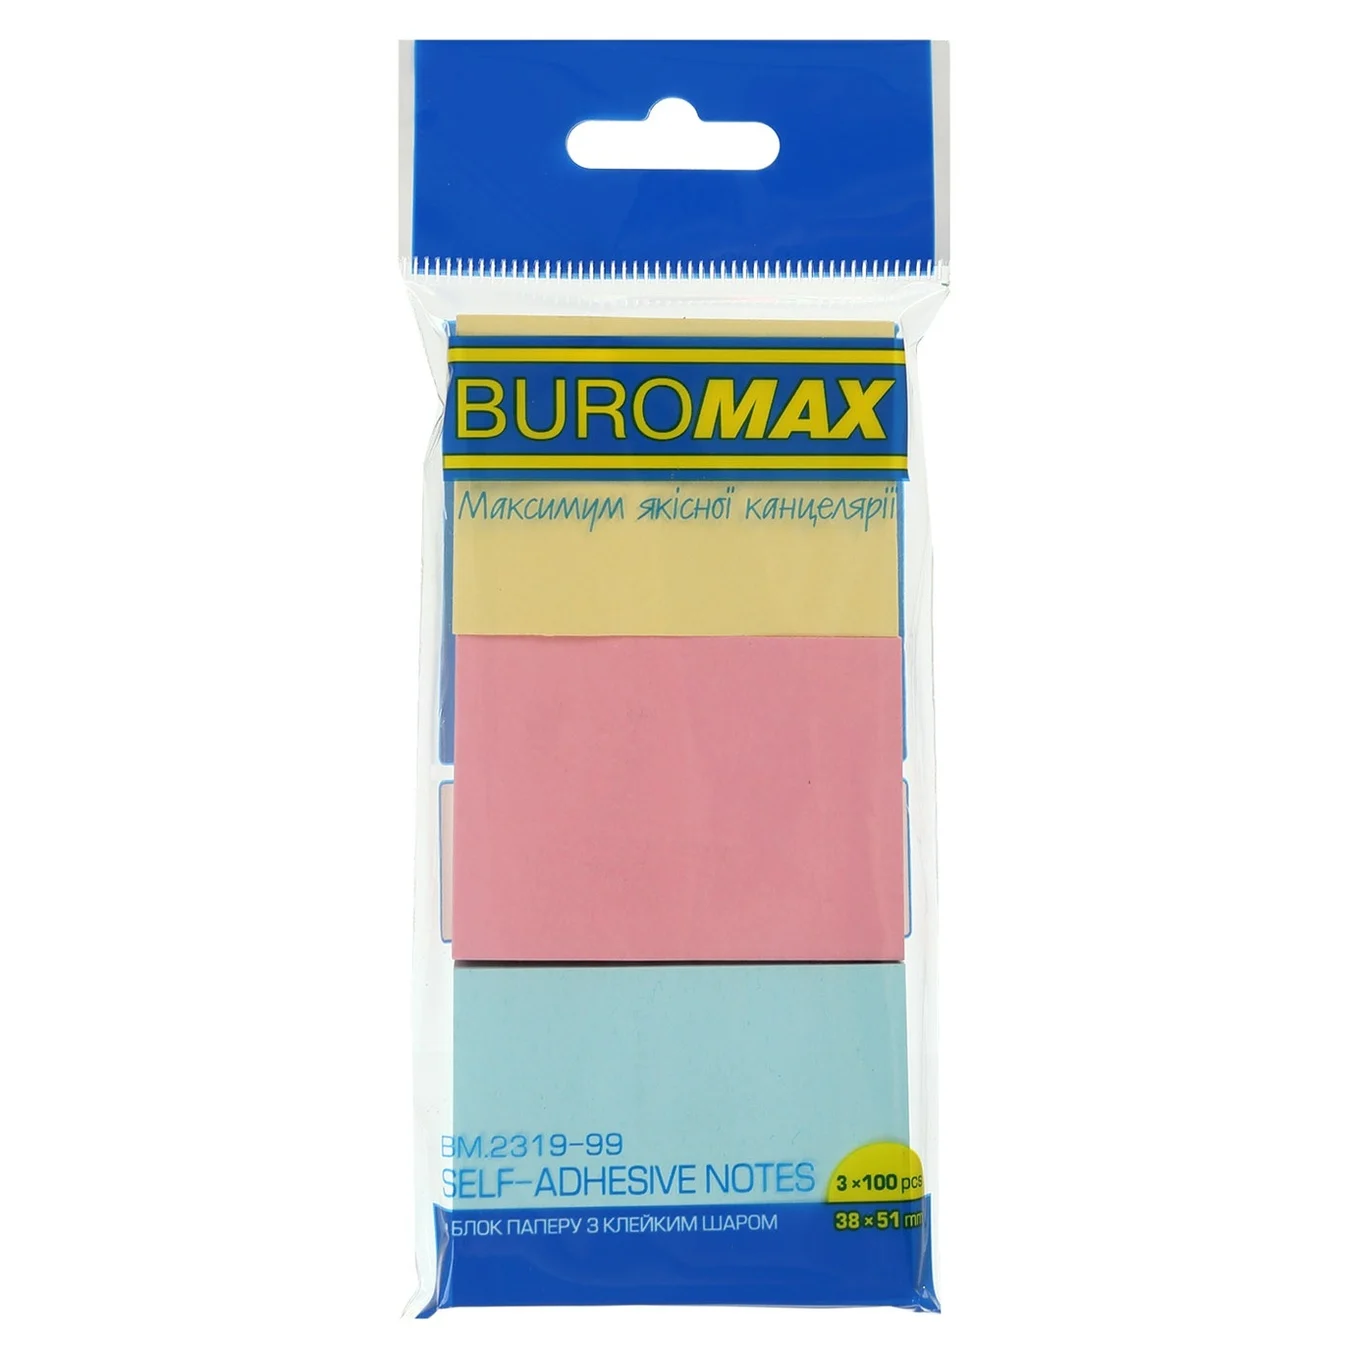 Notepad BuroMax 100 assorted sheets in a blister 3 pcs 38*51mm